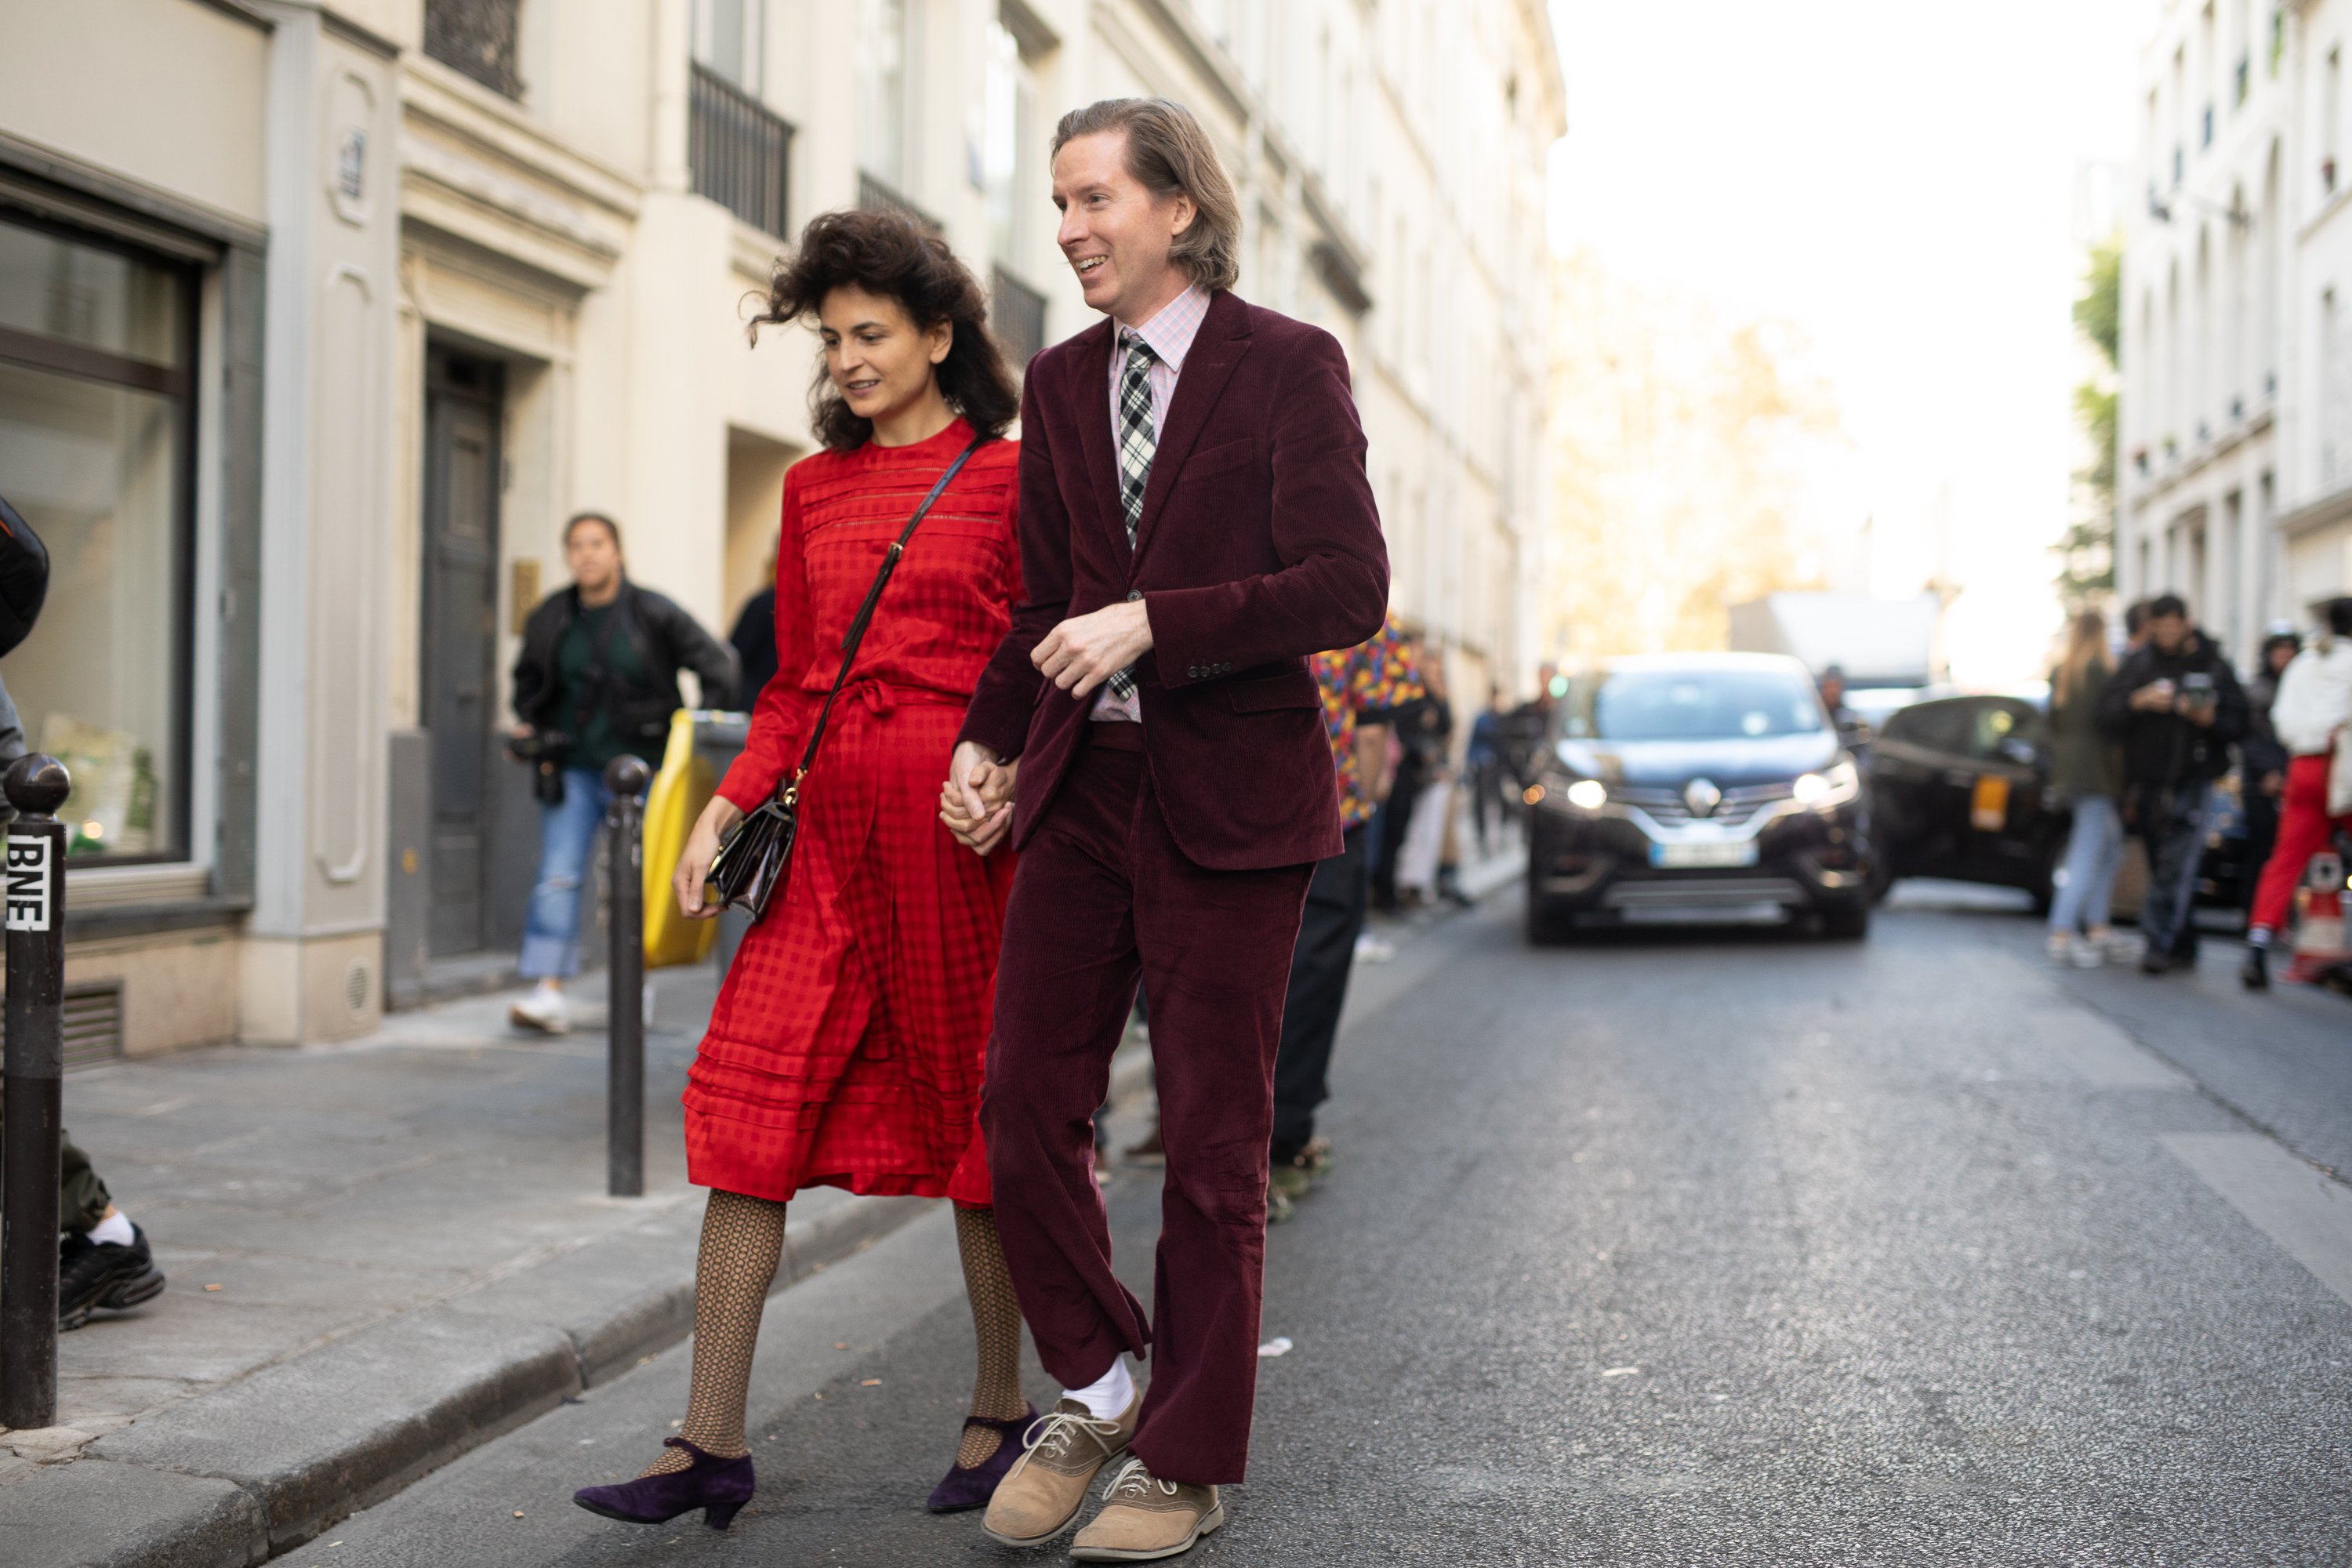 Wes Anderson and Juman Malouf on the street during Paris Fashion Week on October 1, 2018 in Paris. | Source: Getty Images